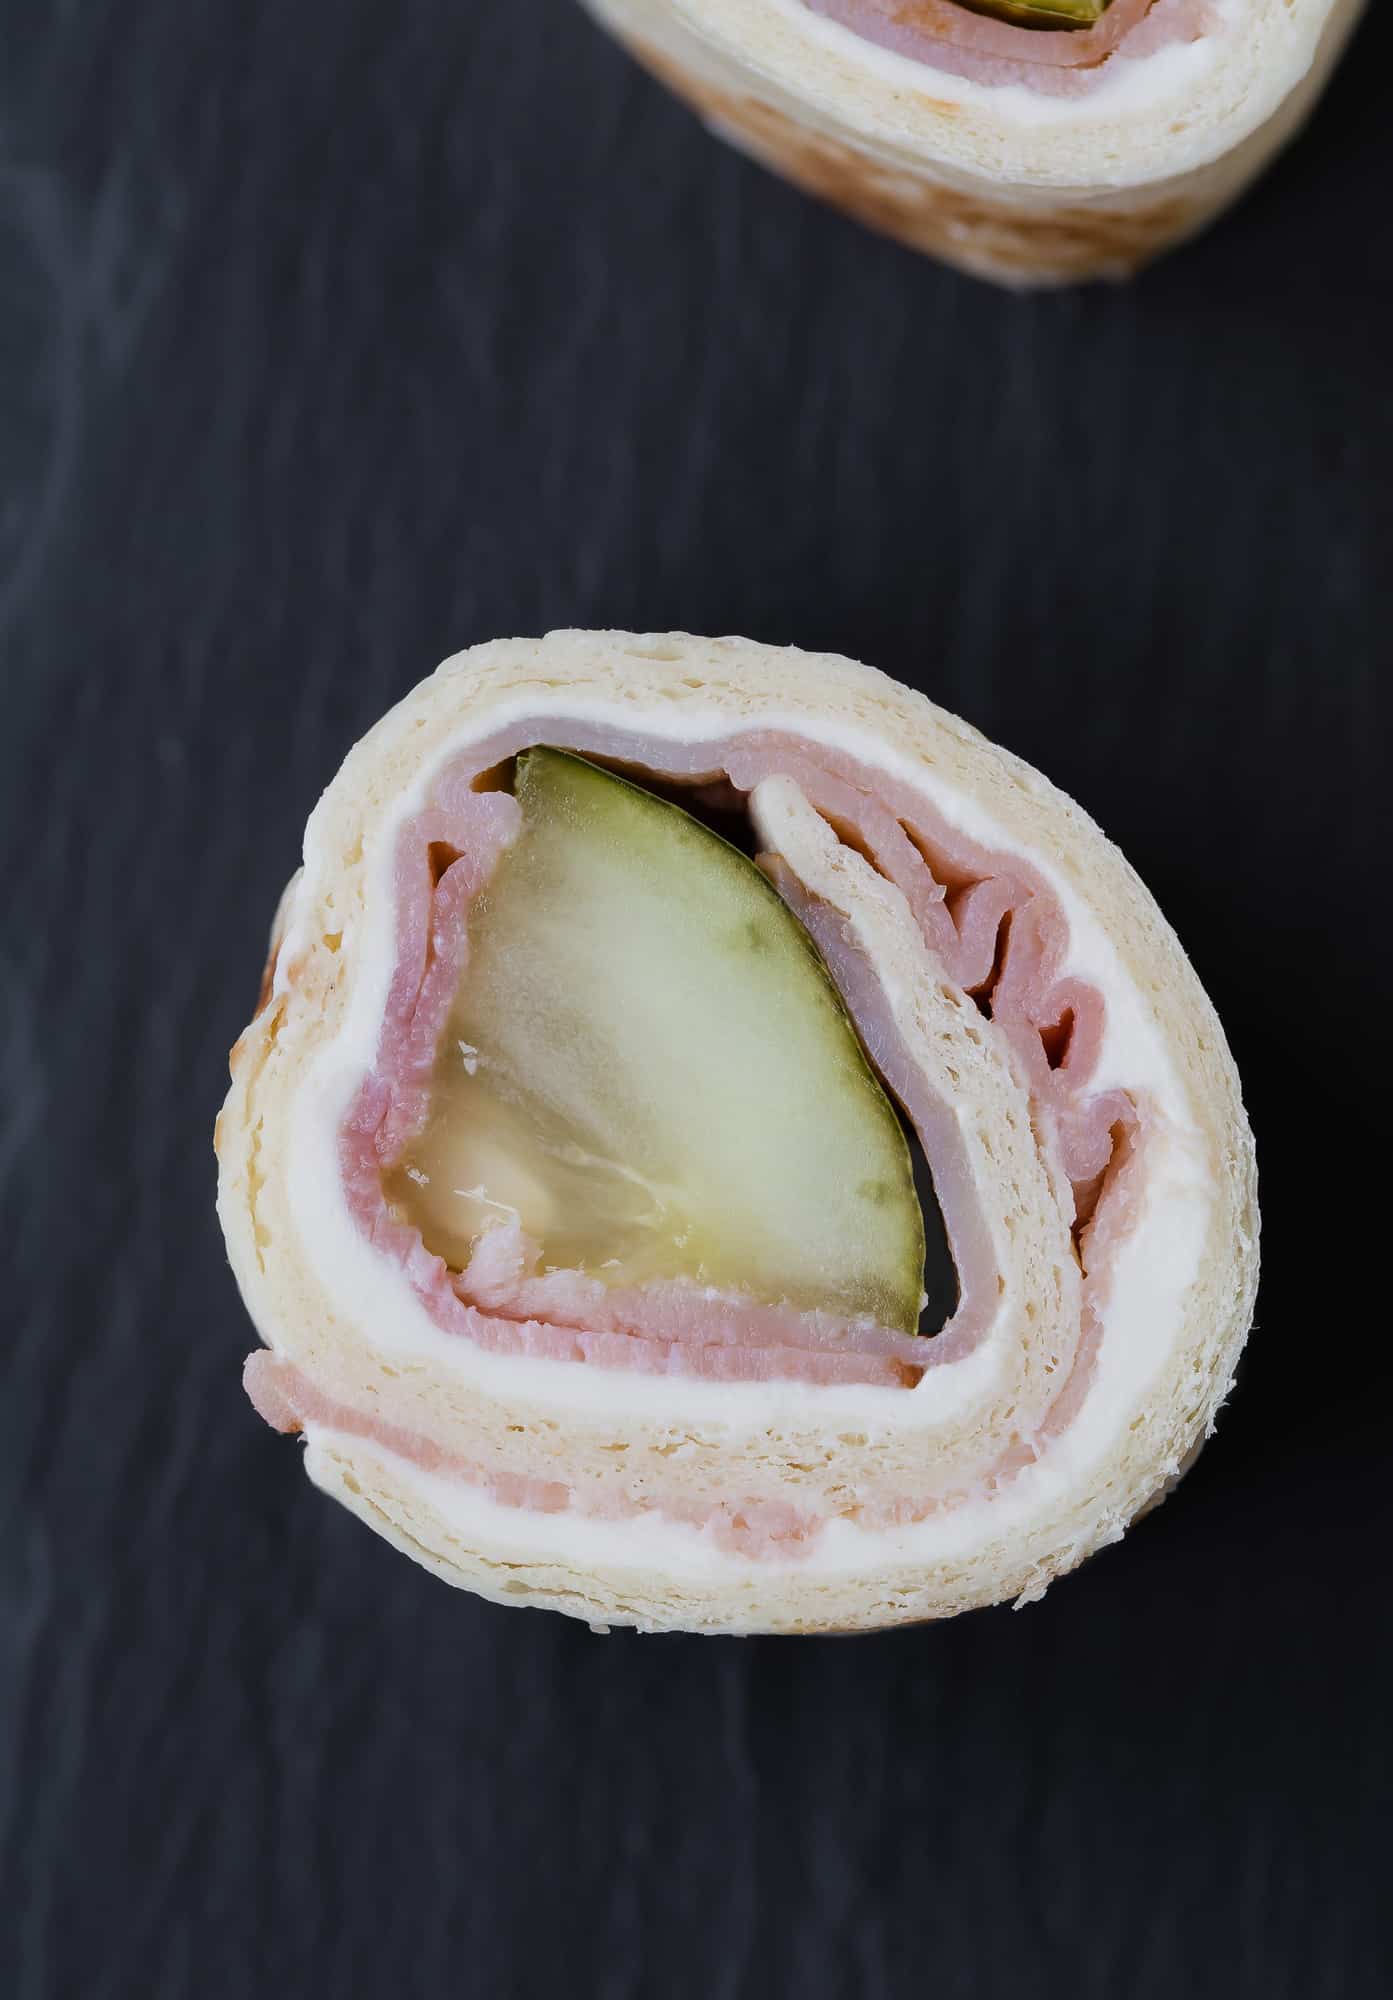 Pickle, ham, and cream cheese rolled in a tortilla.